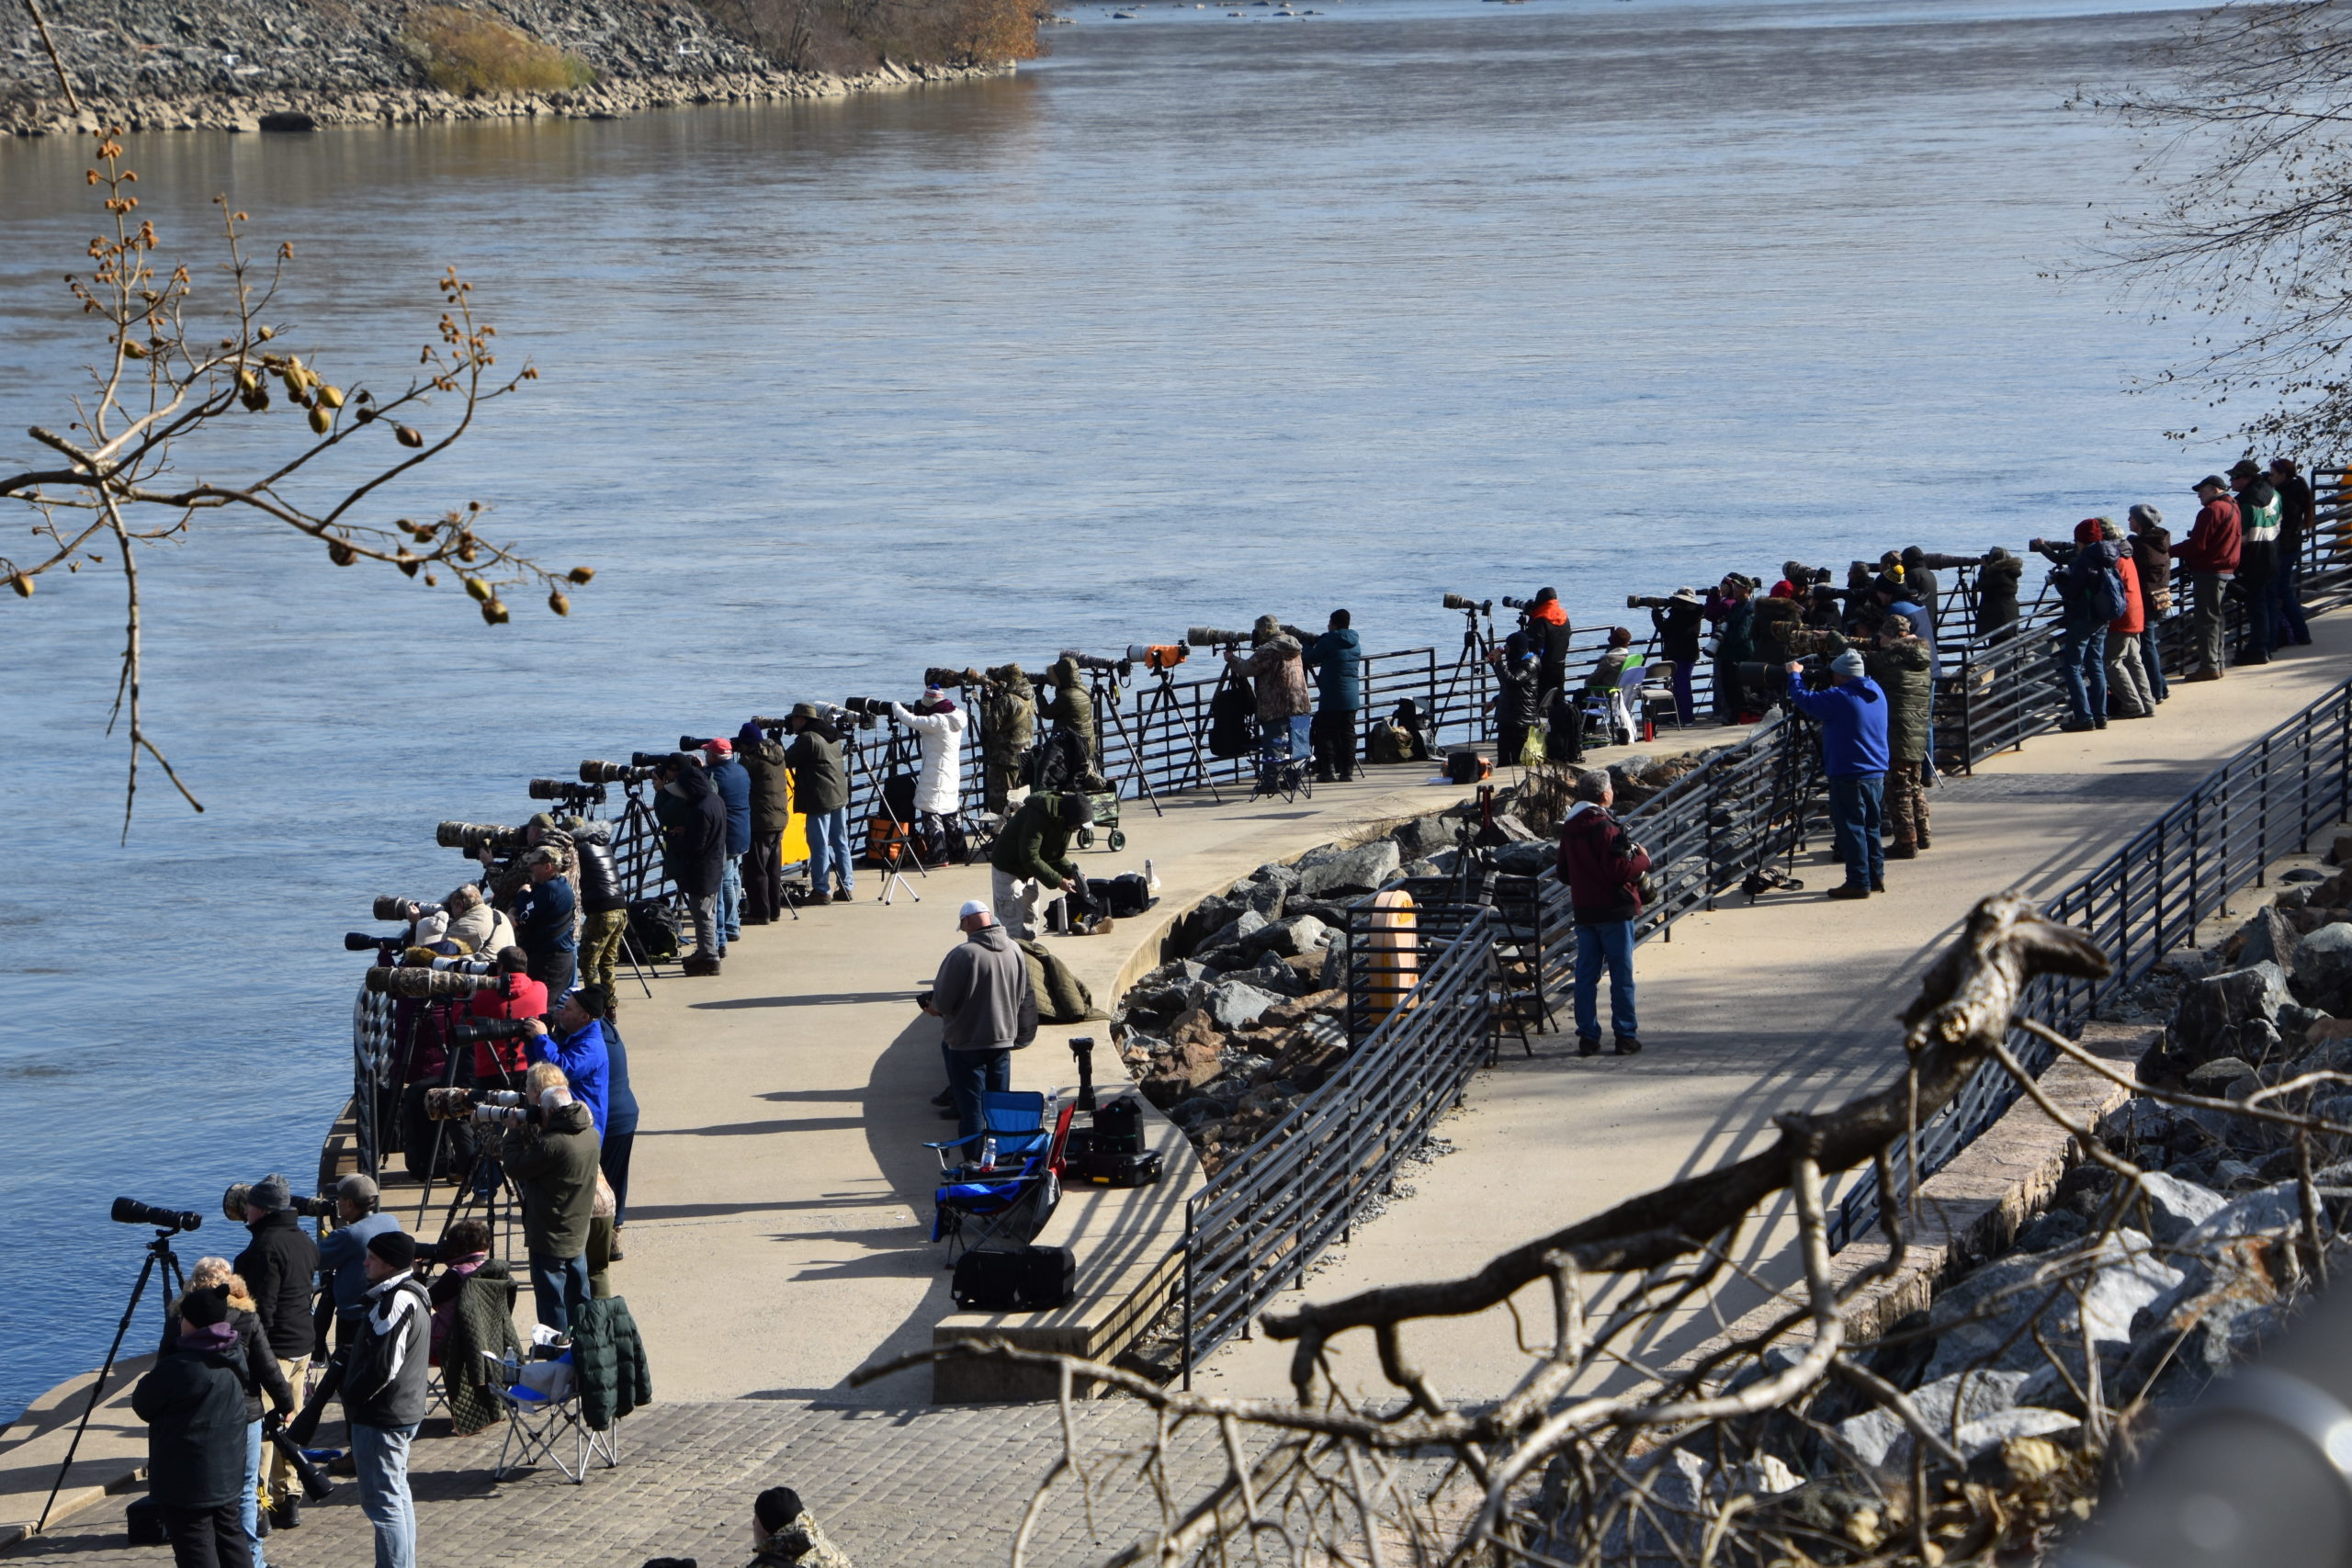 Photograph of a relatively large group of bald eagle watchers at Conowingo Dam on the Susquehanna River in Maryland. 